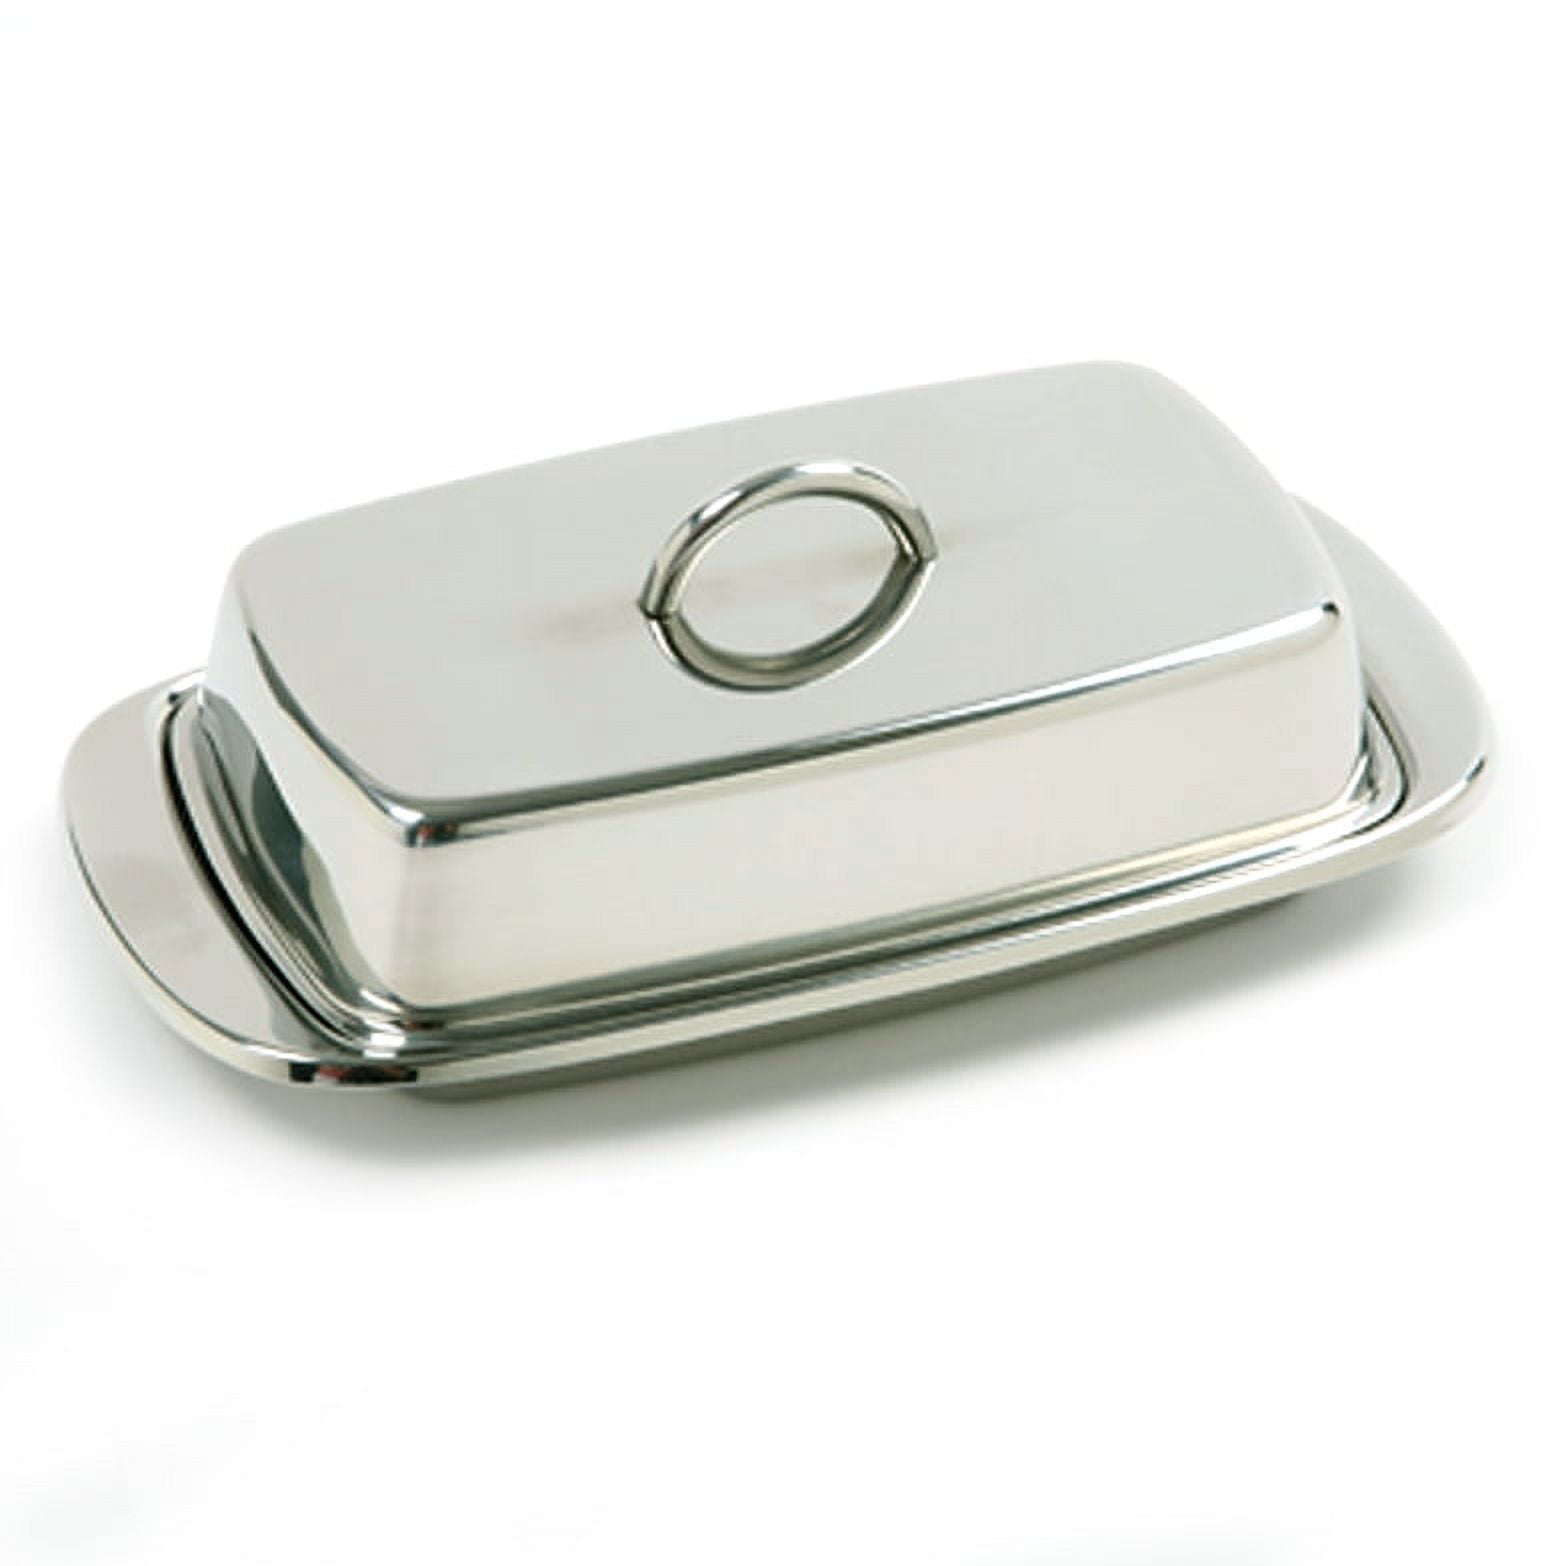 HKEEY Butter Dish, Ceramic Butter Dish with lid and Stainless